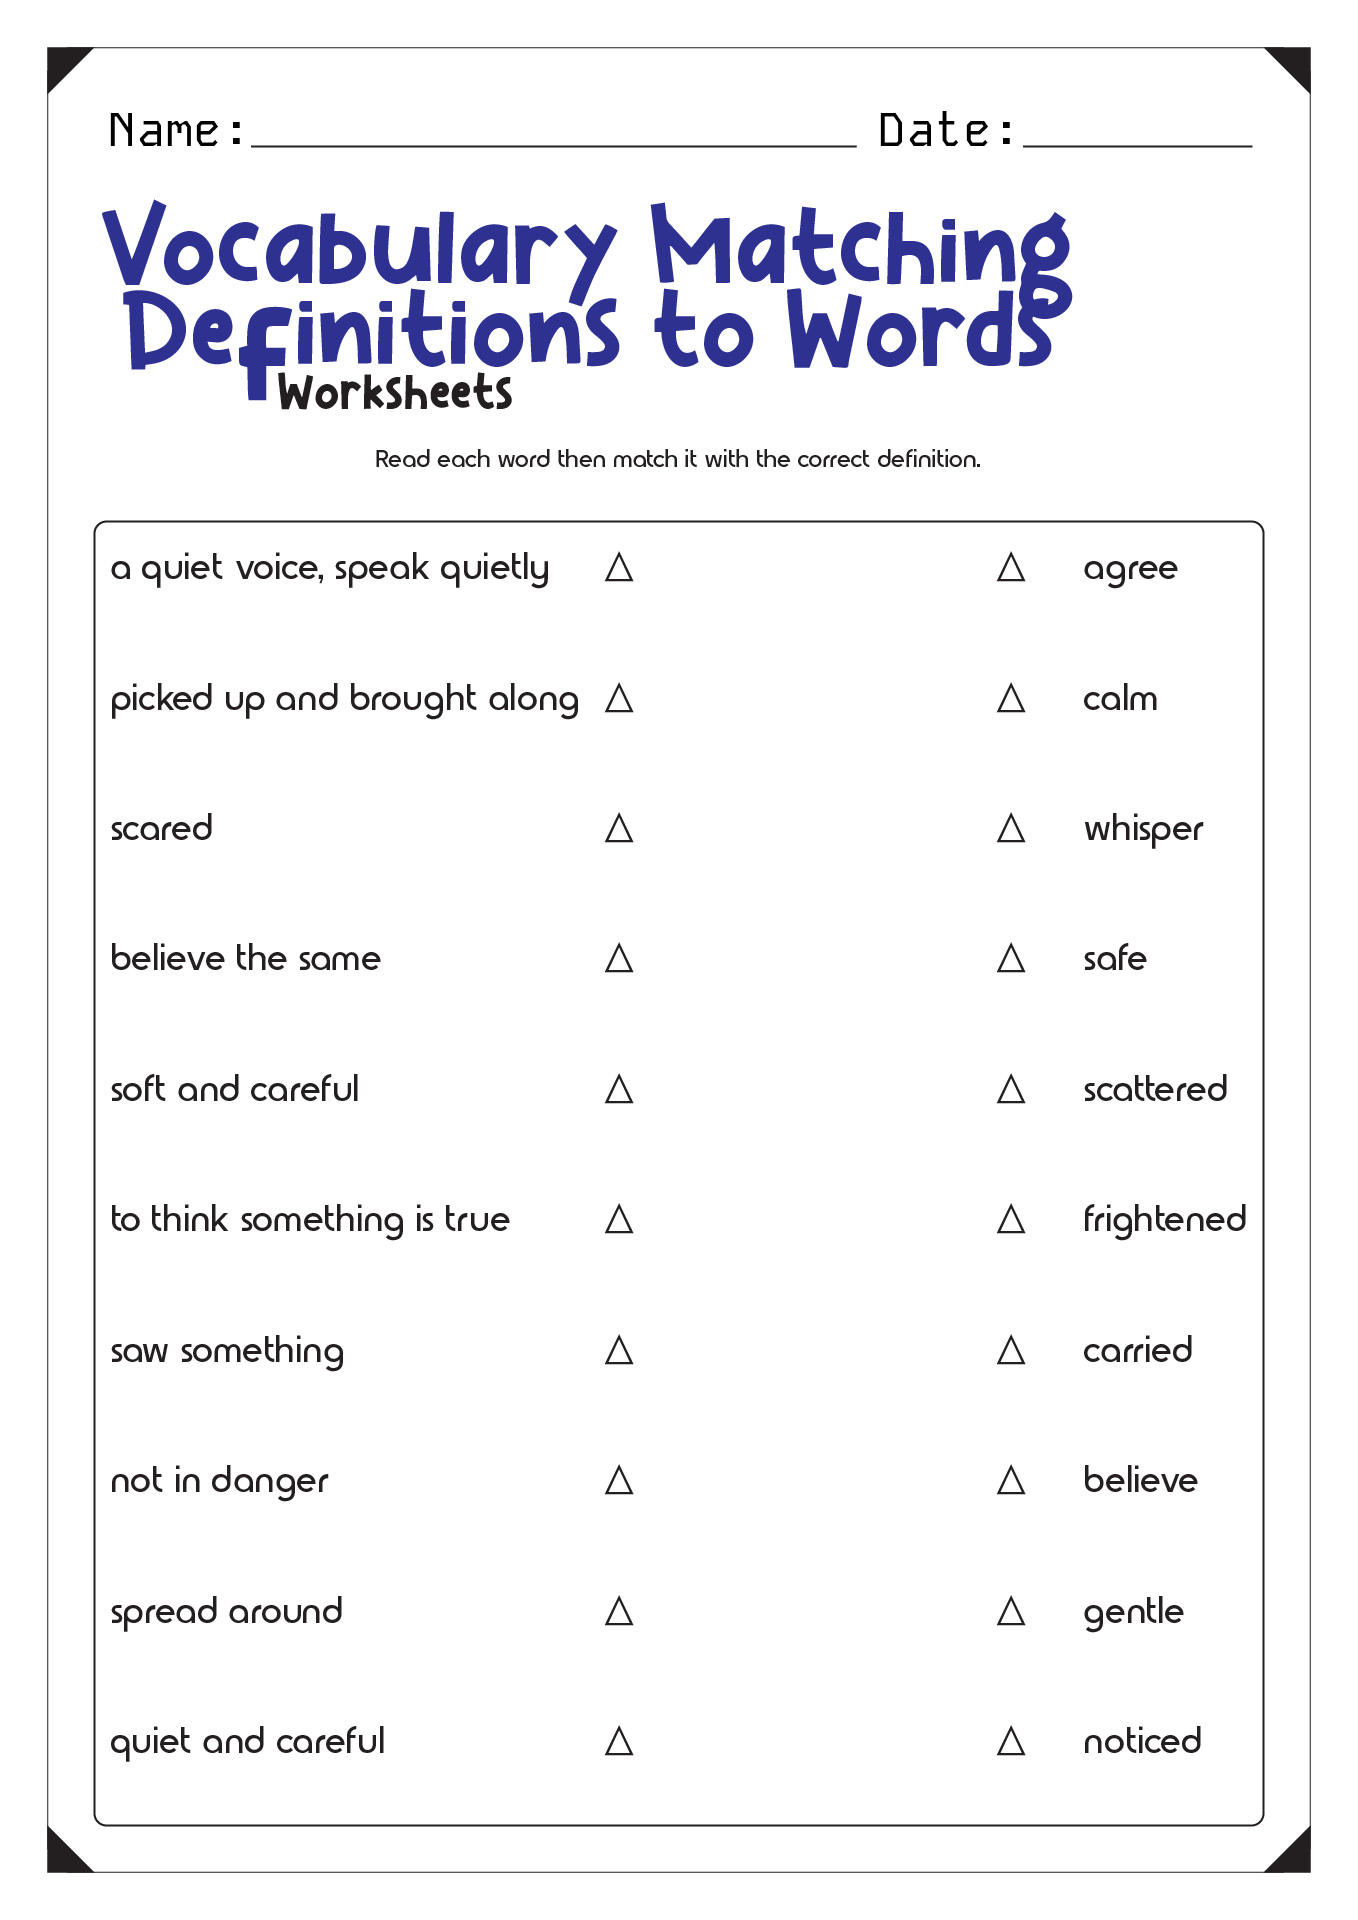 Vocabulary Matching Definitions to Words Worksheets